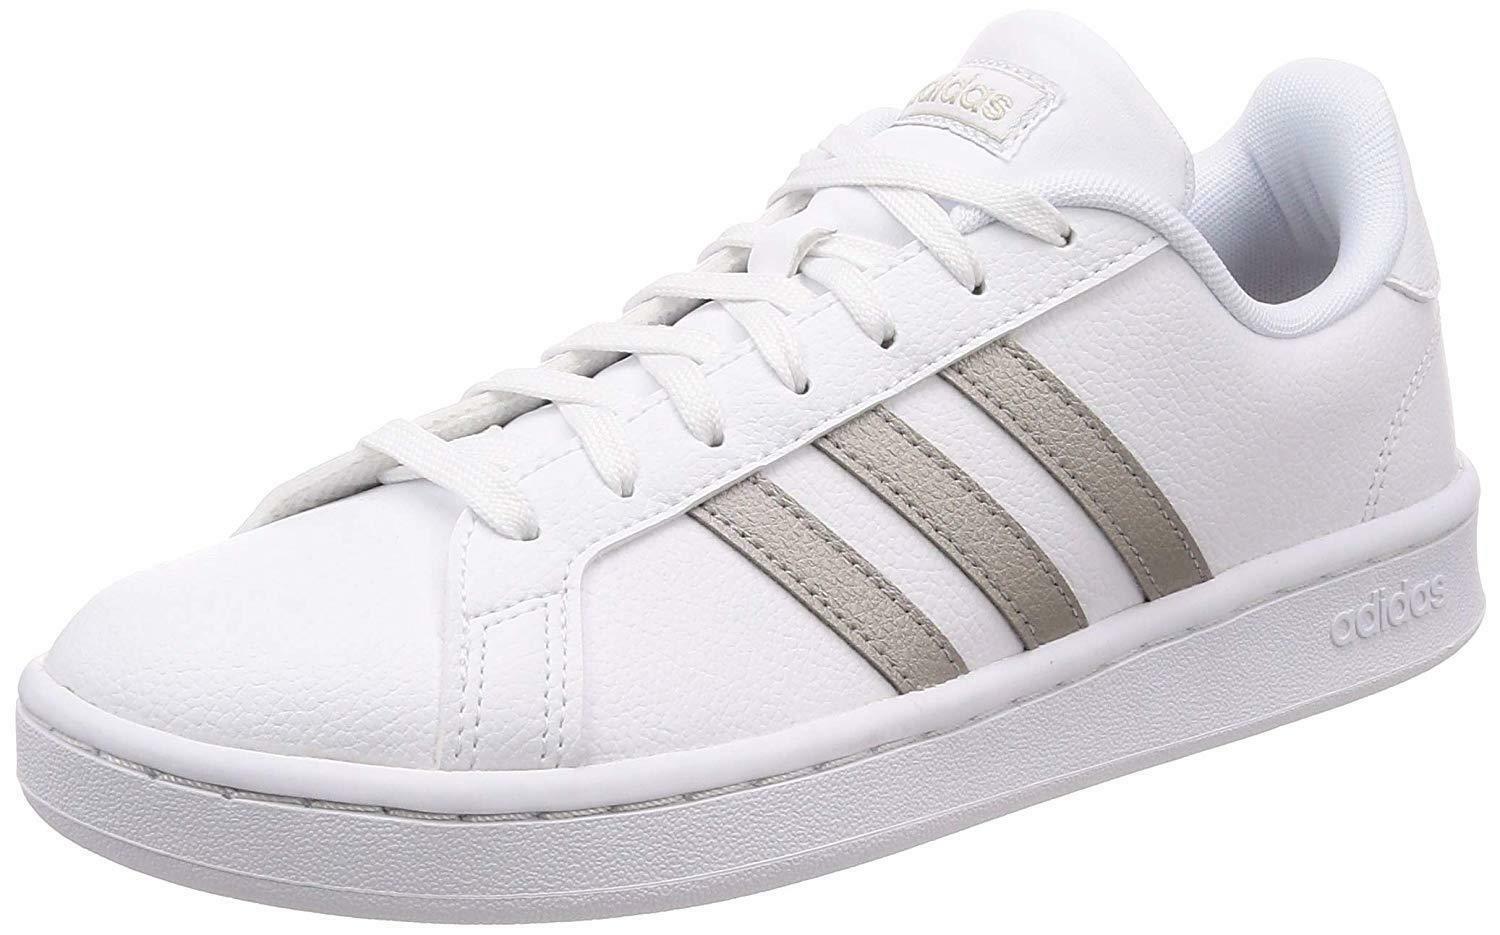 adidas sneakers adidas grand court base ee7874. unisex adulto, colore bianco